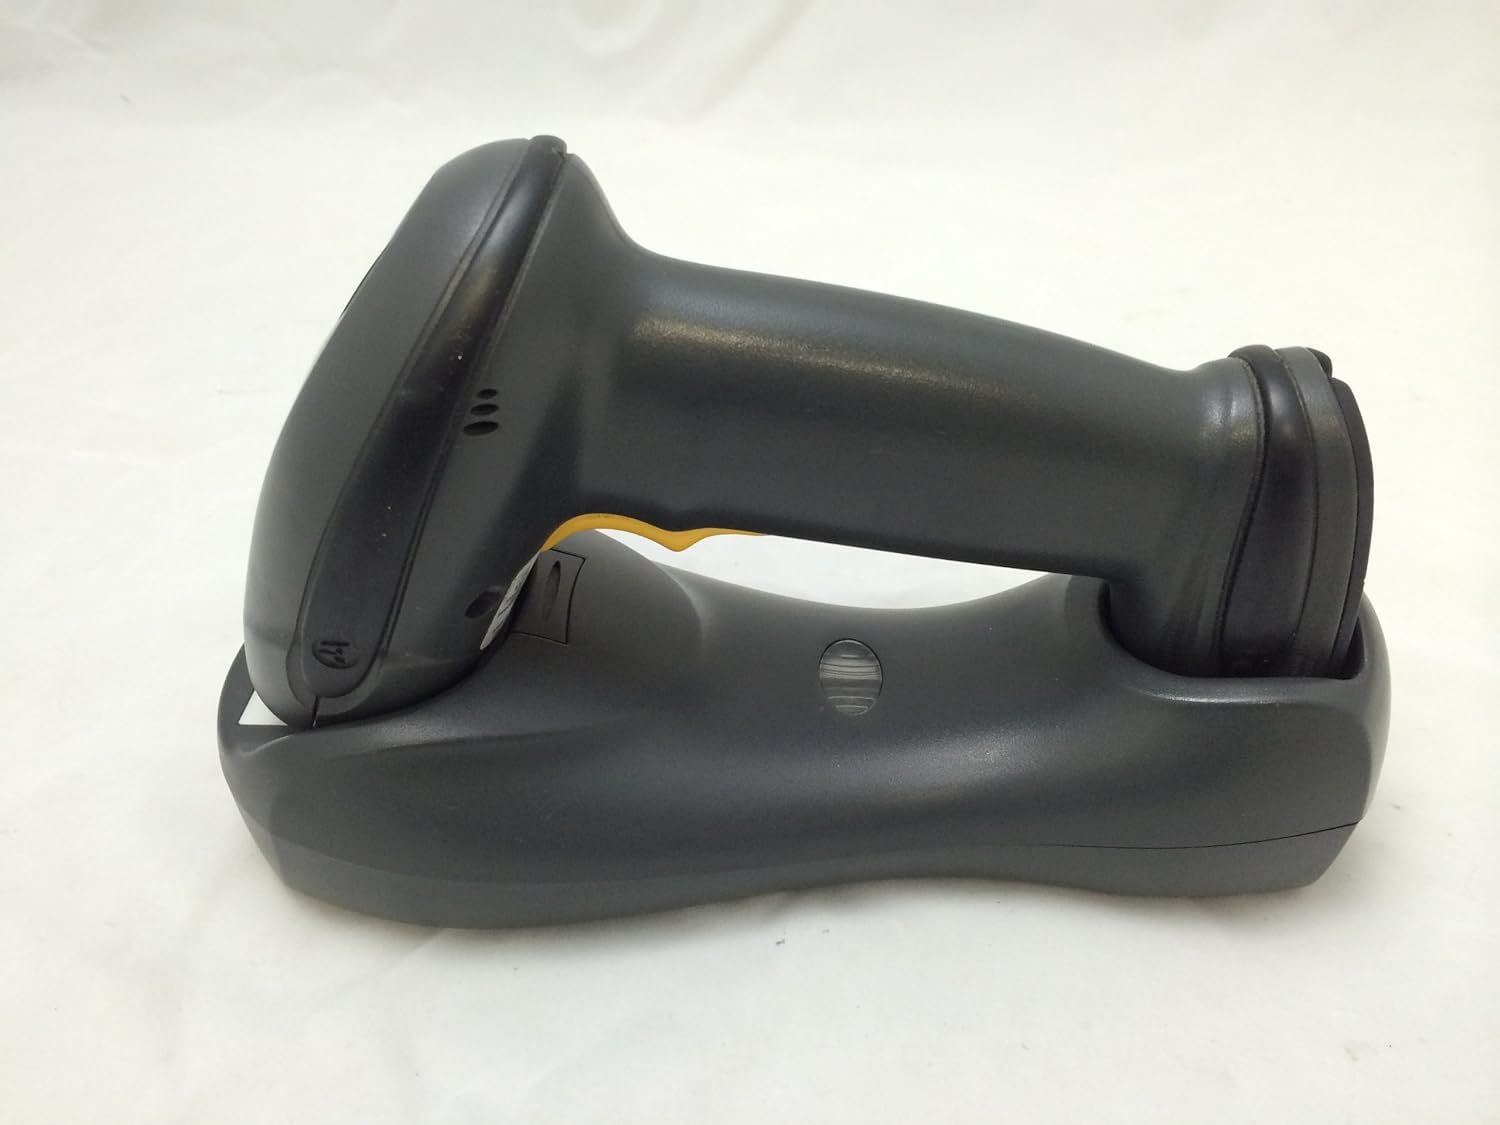 Dark Grey Symbol Ls4278 Cordless Barcode Scanner With Cradle And Usb Cable. - $251.94